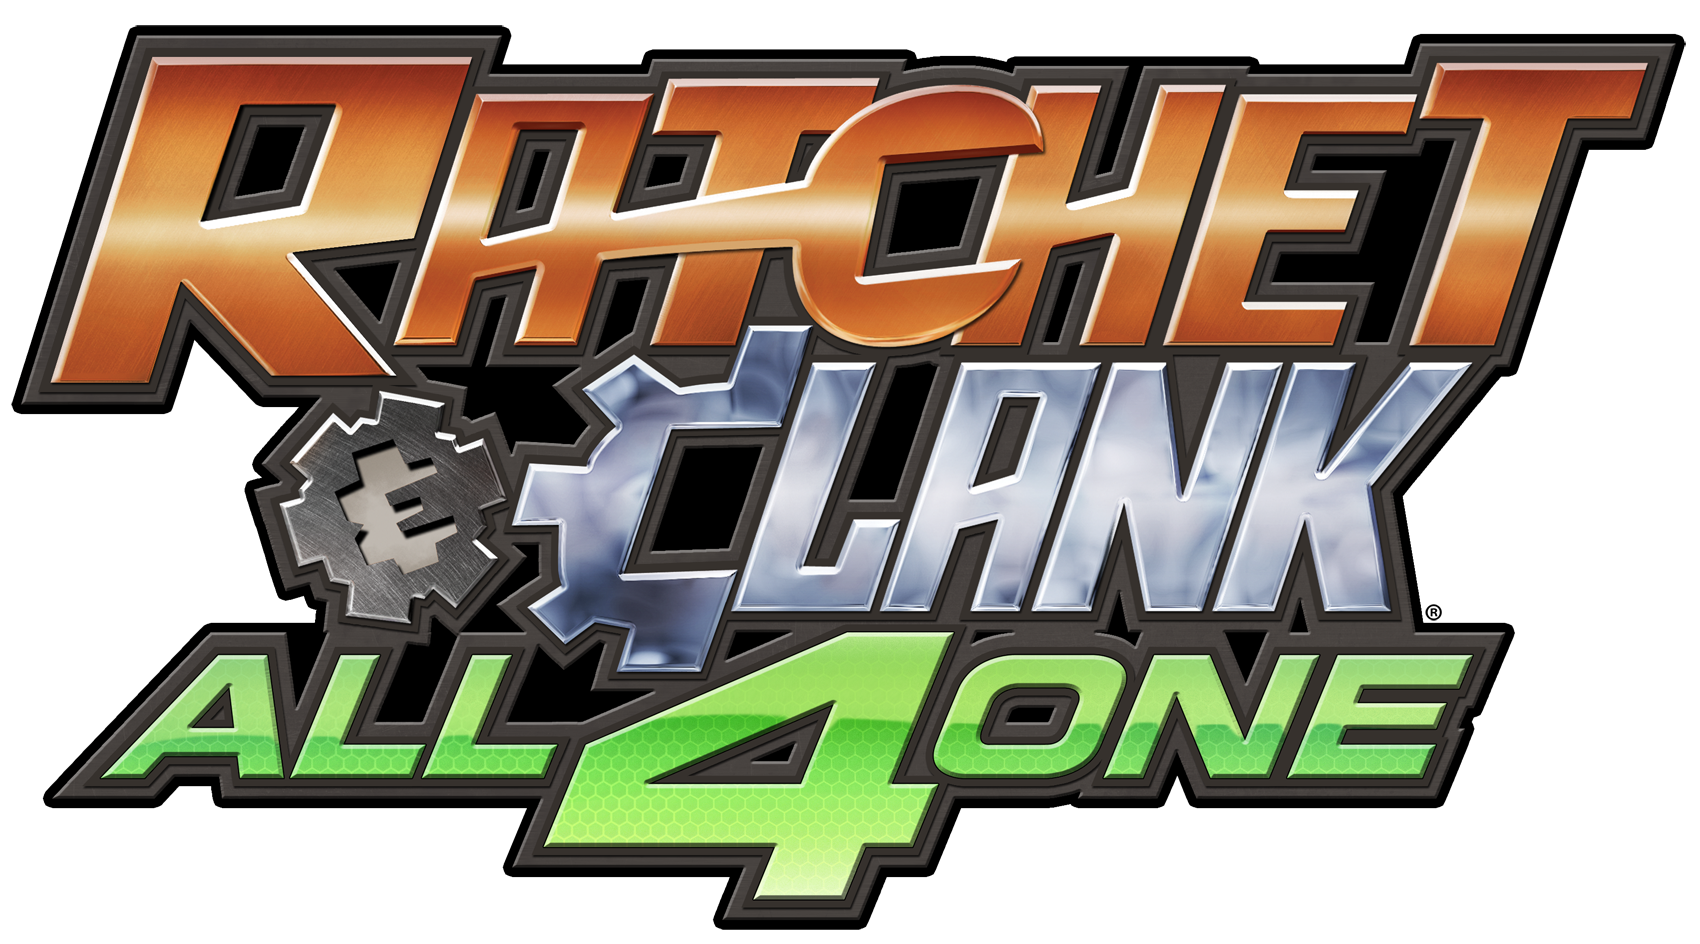 Ratchet & Clank: All For One Backgrounds, Compatible - PC, Mobile, Gadgets| 1700x944 px